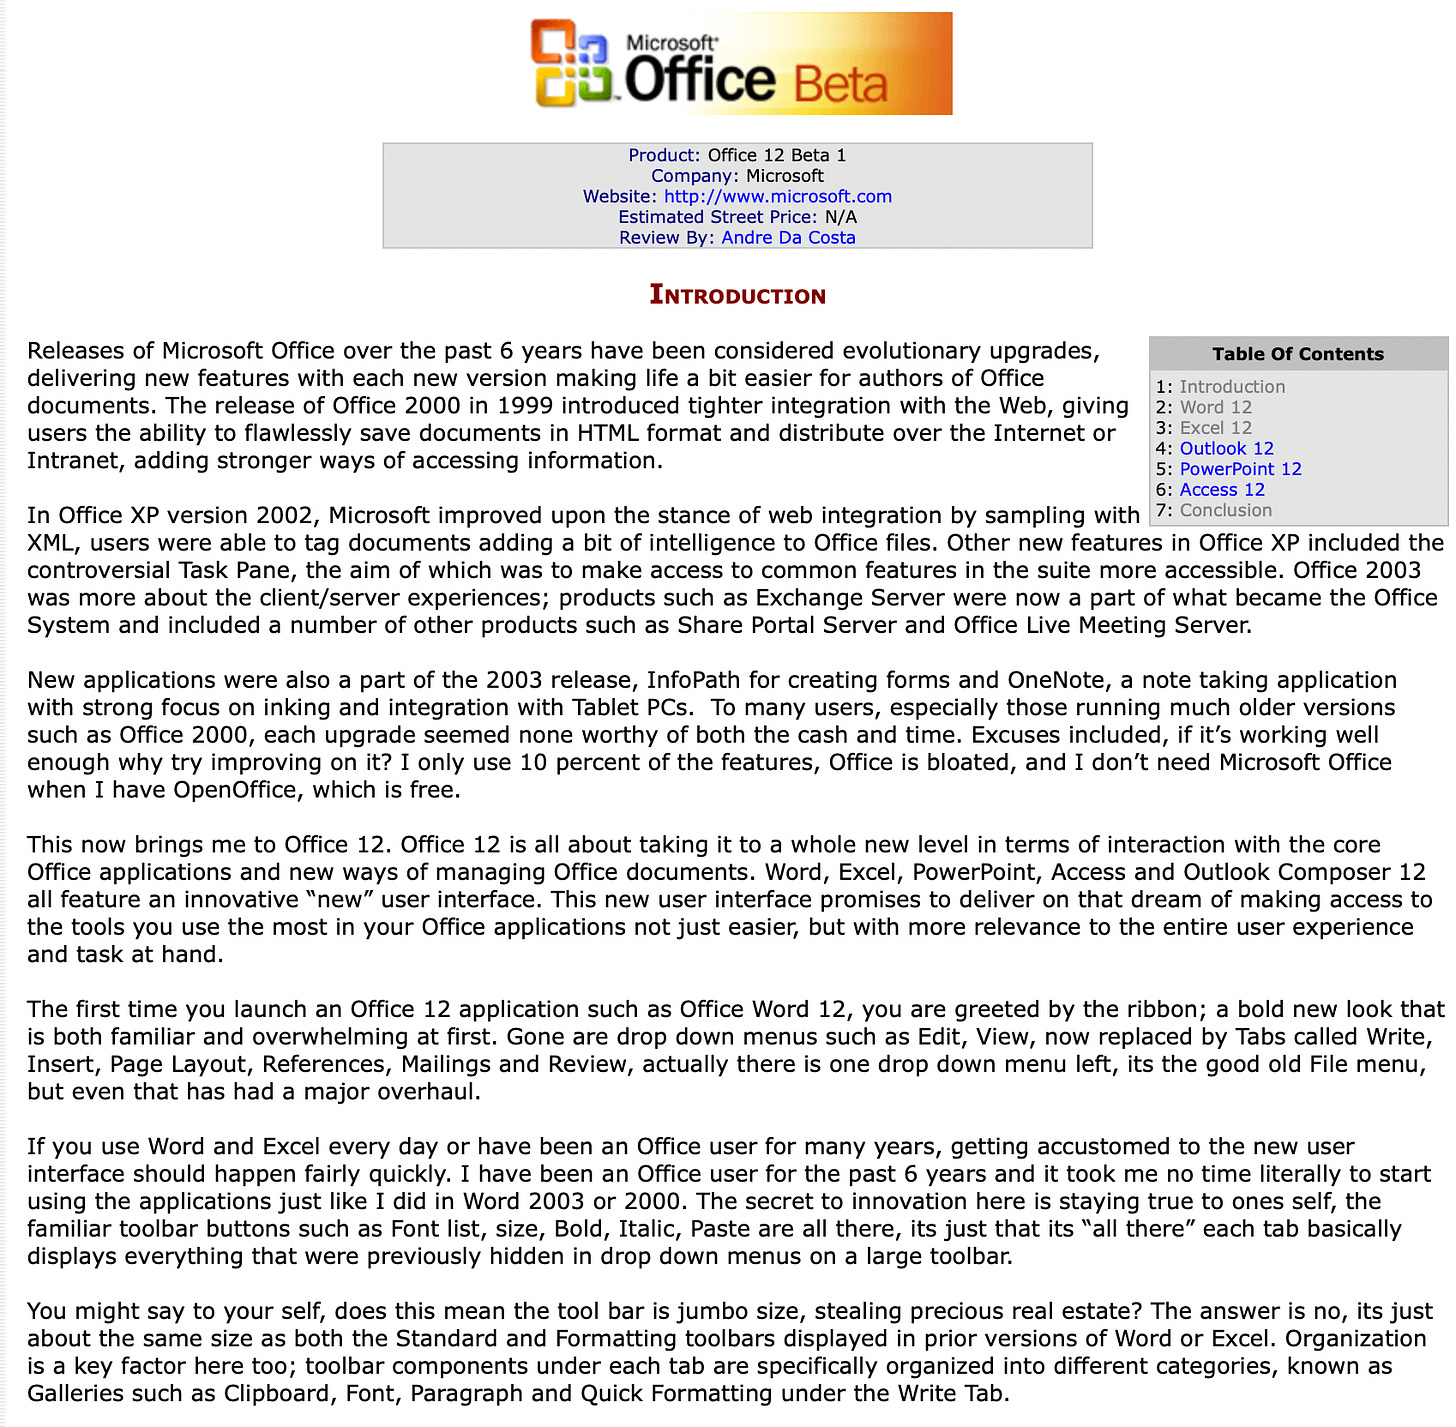 Releases of Microsoft Office over the past 6 years have been considered evolutionary upgrades, delivering new features with each new version making life a bit easier for authors of Office documents. The release of Office 2000 in 1999 introduced tighter integration with the Web, giving users the ability to flawlessly save documents in HTML format and distribute over the Internet or Intranet, adding stronger ways of accessing information.   In Office XP version 2002, Microsoft improved upon the stance of web integration by sampling with XML, users were able to tag documents adding a bit of intelligence to Office files. Other new features in Office XP included the controversial Task Pane, the aim of which was to make access to common features in the suite more accessible. Office 2003 was more about the client/server experiences; products such as Exchange Server were now a part of what became the Office System and included a number of other products such as Share Portal Server and Office Live Meeting Server.  New applications were also a part of the 2003 release, InfoPath for creating forms and OneNote, a note taking application with strong focus on inking and integration with Tablet PCs.  To many users, especially those running much older versions such as Office 2000, each upgrade seemed none worthy of both the cash and time. Excuses included, if it’s working well enough why try improving on it? I only use 10 percent of the features, Office is bloated, and I don’t need Microsoft Office when I have OpenOffice, which is free.  This now brings me to Office 12. Office 12 is all about taking it to a whole new level in terms of interaction with the core Office applications and new ways of managing Office documents. Word, Excel, PowerPoint, Access and Outlook Composer 12 all feature an innovative “new” user interface. This new user interface promises to deliver on that dream of making access to the tools you use the most in your Office applications not just easier, but with more relevance to the entire user experience and task at hand.  The first time you launch an Office 12 application such as Office Word 12, you are greeted by the ribbon; a bold new look that is both familiar and overwhelming at first. Gone are drop down menus such as Edit, View, now replaced by Tabs called Write, Insert, Page Layout, References, Mailings and Review, actually there is one drop down menu left, its the good old File menu, but even that has had a major overhaul.  If you use Word and Excel every day or have been an Office user for many years, getting accustomed to the new user interface should happen fairly quickly. I have been an Office user for the past 6 years and it took me no time literally to start using the applications just like I did in Word 2003 or 2000. The secret to innovation here is staying true to ones self, the familiar toolbar buttons such as Font list, size, Bold, Italic, Paste are all there, its just that its “all there” each tab basically displays everything that were previously hidden in drop down menus on a large toolbar.  You might say to your self, does this mean the tool bar is jumbo size, stealing precious real estate? The answer is no, its just about the same size as both the Standard and Formatting toolbars displayed in prior versions of Word or Excel. Organization is a key factor here too; toolbar components under each tab are specifically organized into different categories, known as Galleries such as Clipboard, Font, Paragraph and Quick Formatting under the Write Tab.  Office in general includes new user customization features such as a dialogue launcher that is integrated into the different categories (Galleries) that make up the Office 12 UI. So for example, the Paragraph category links to the Paragraph dialogue and the Font Gallery links to the Font dialogue.  This sounds unwieldy and confusing at first, but it’s actually refreshing and adds better meaning to how you interact with the interface and use the tools in Office more effectively. To make you feel a bit more comfortable, let’s start talking more in-depth about each “new” Office application, seriously, they are new.